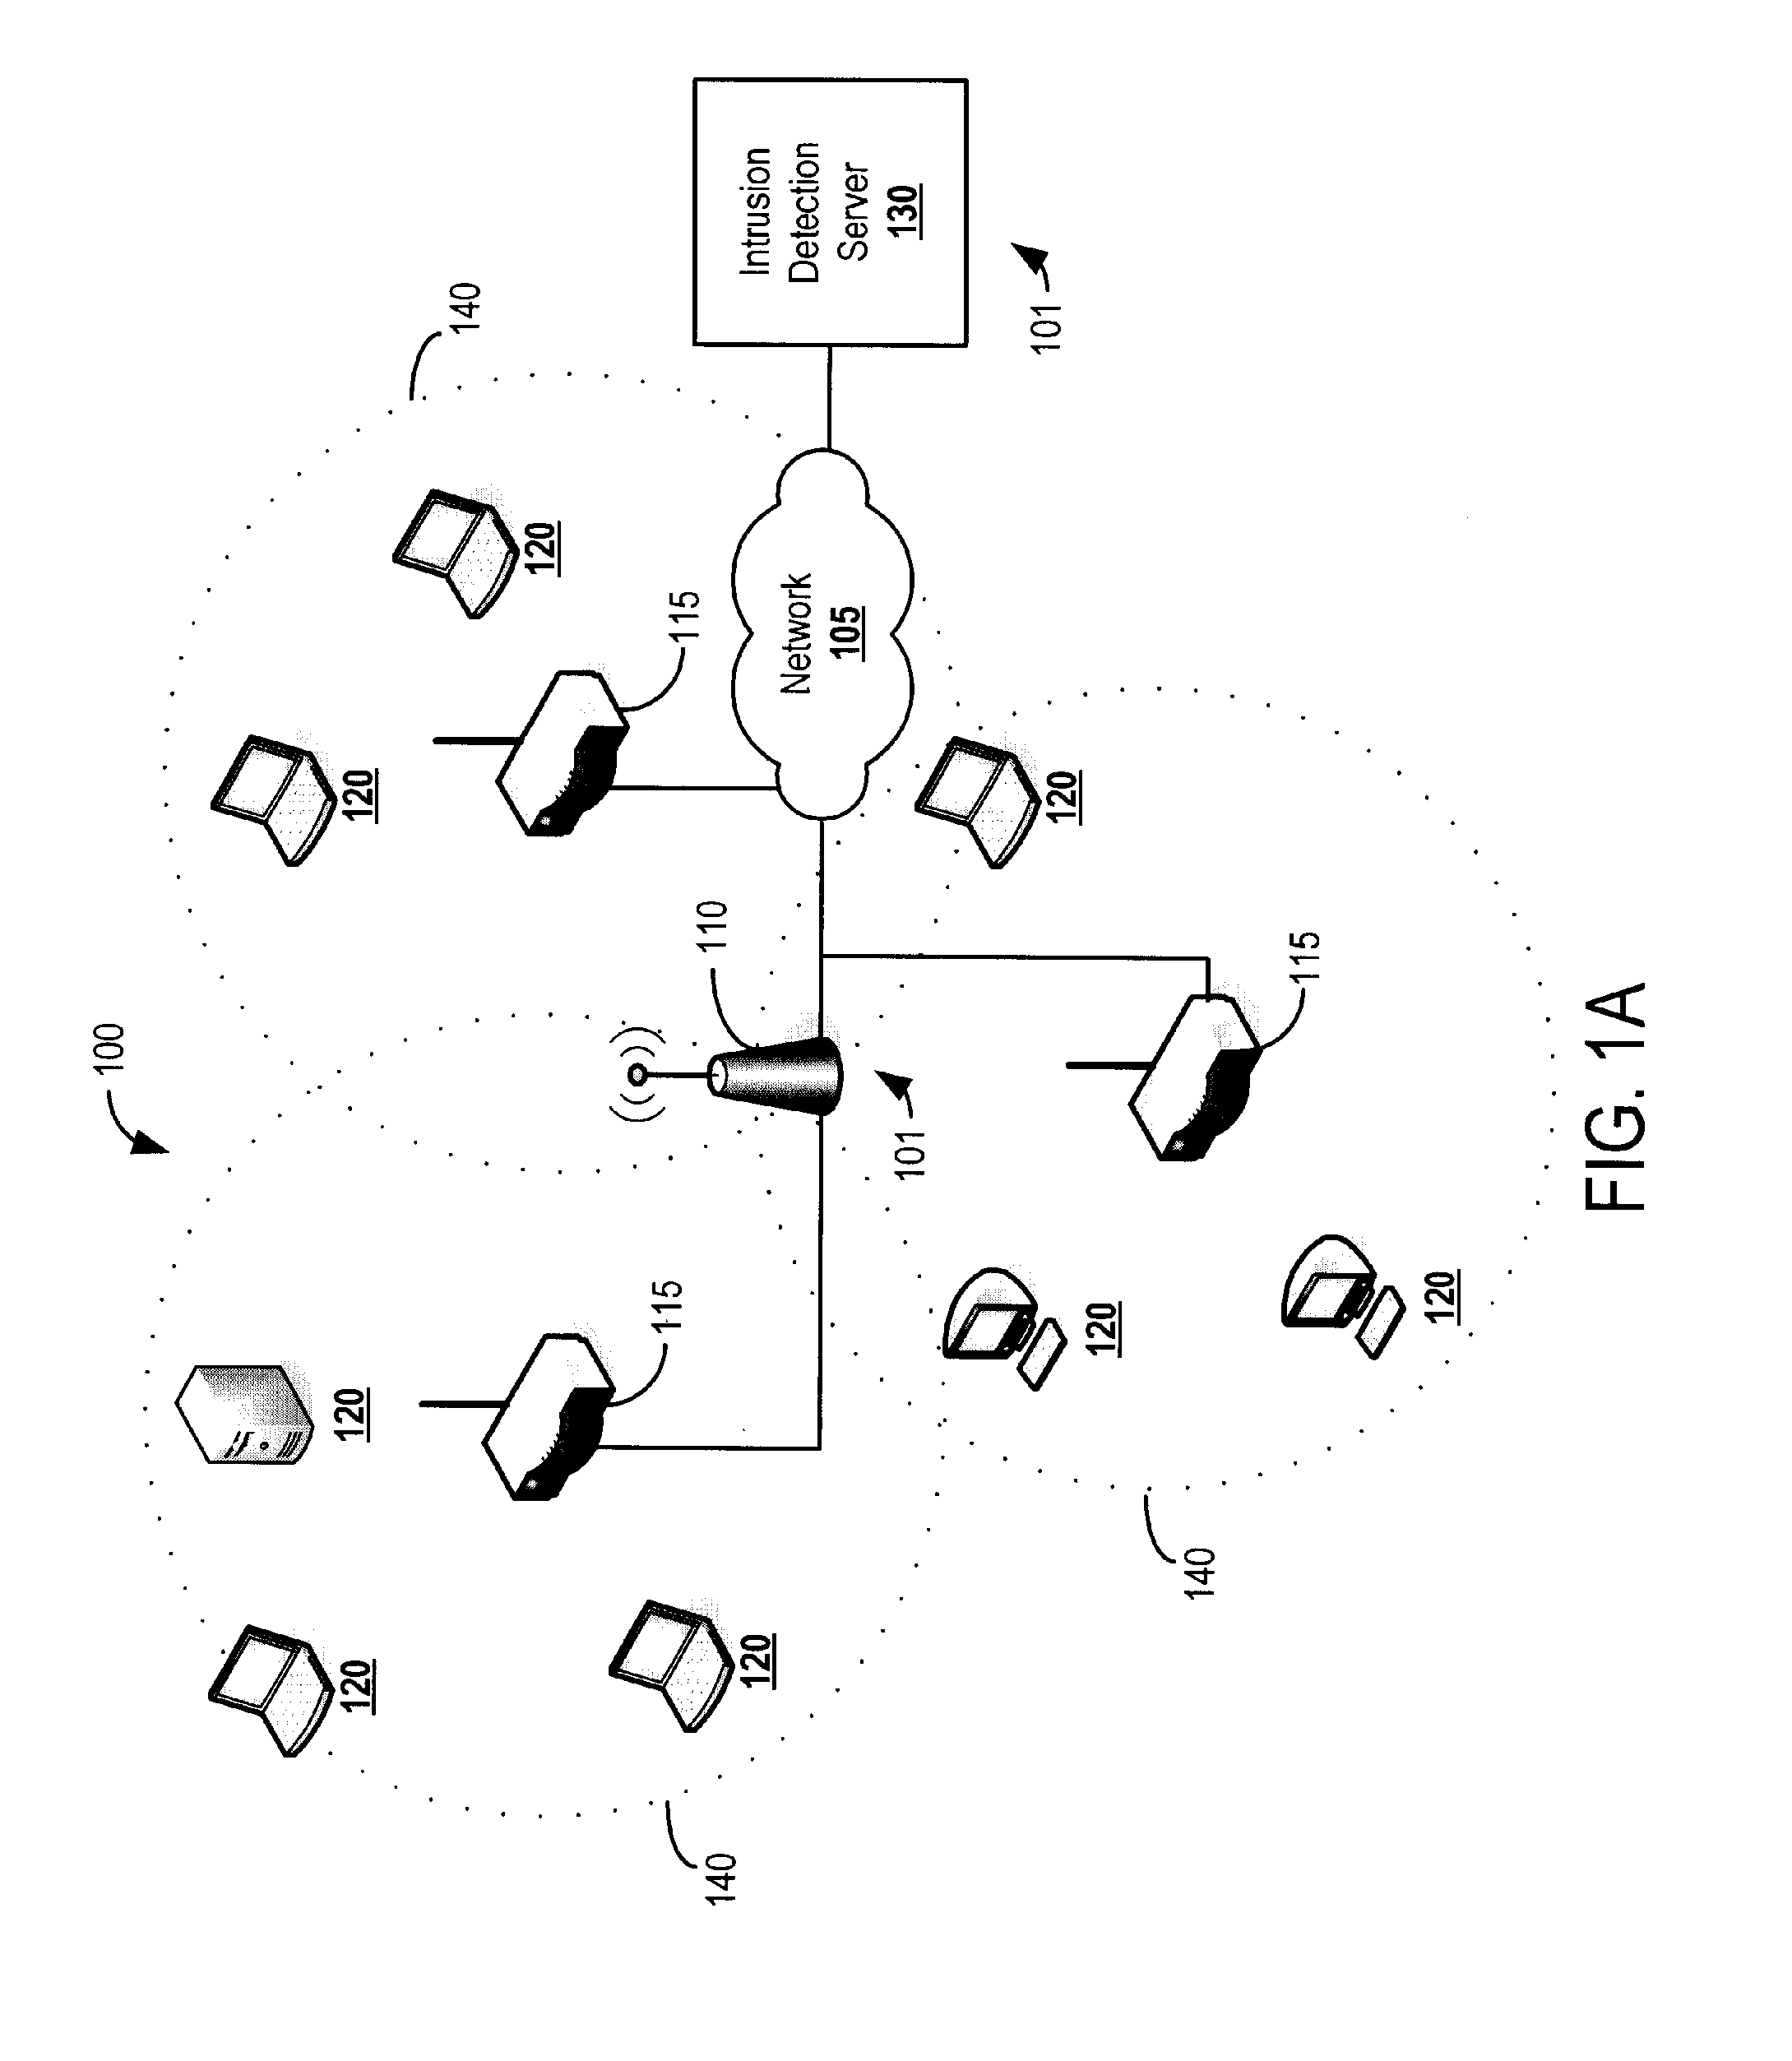 Systems and Methods for Wireless Security Using Distributed Collaboration of Wireless Clients